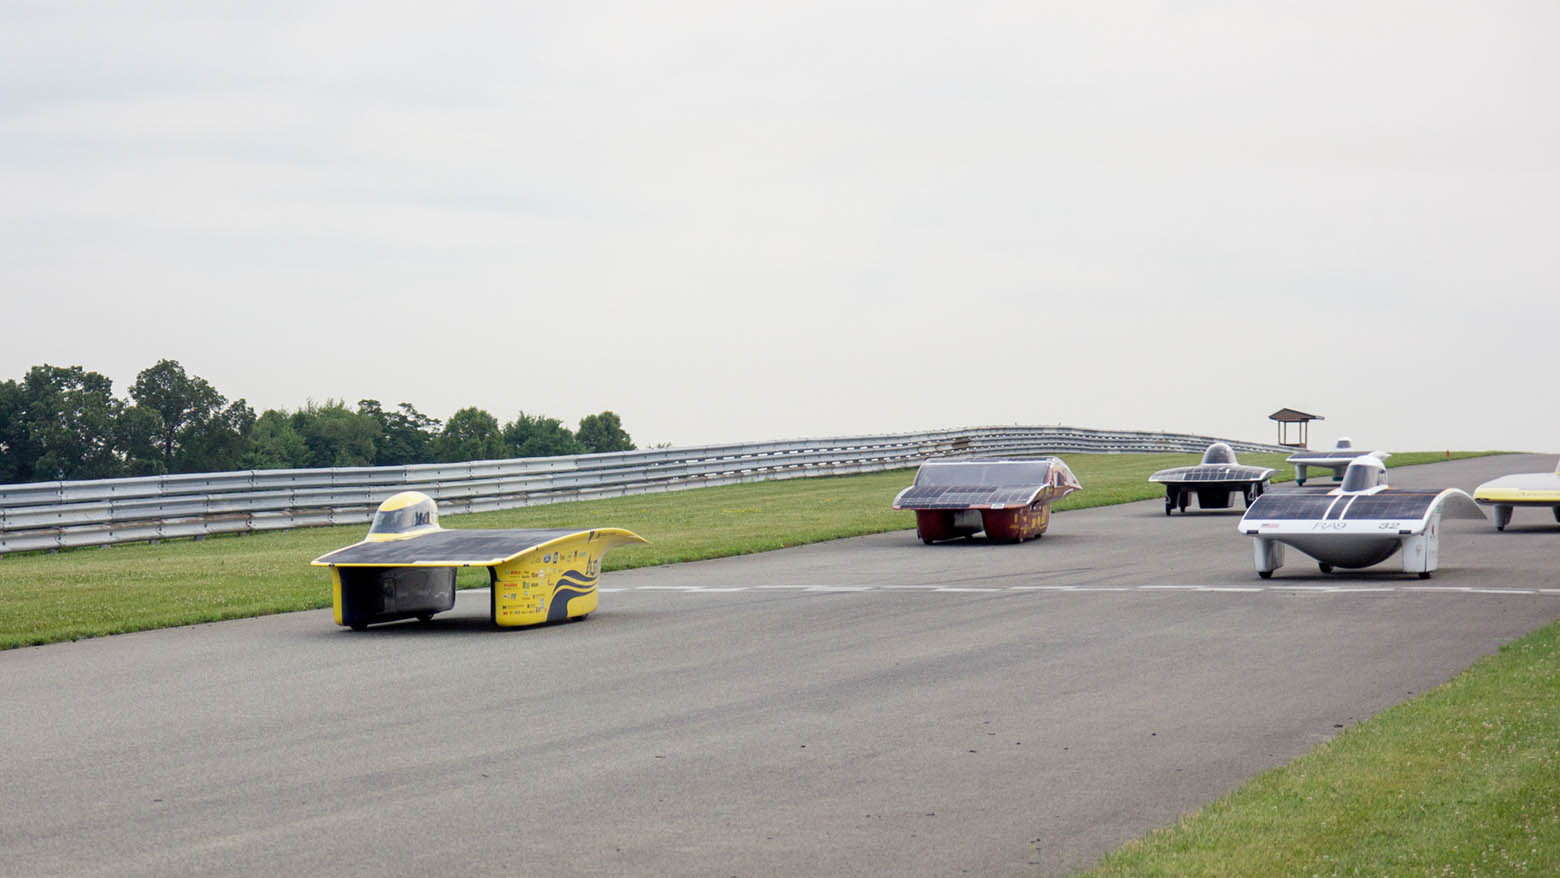 Aurum, the Michigan Solar Car, leads a pack of solar cars across the starting line at a race track.